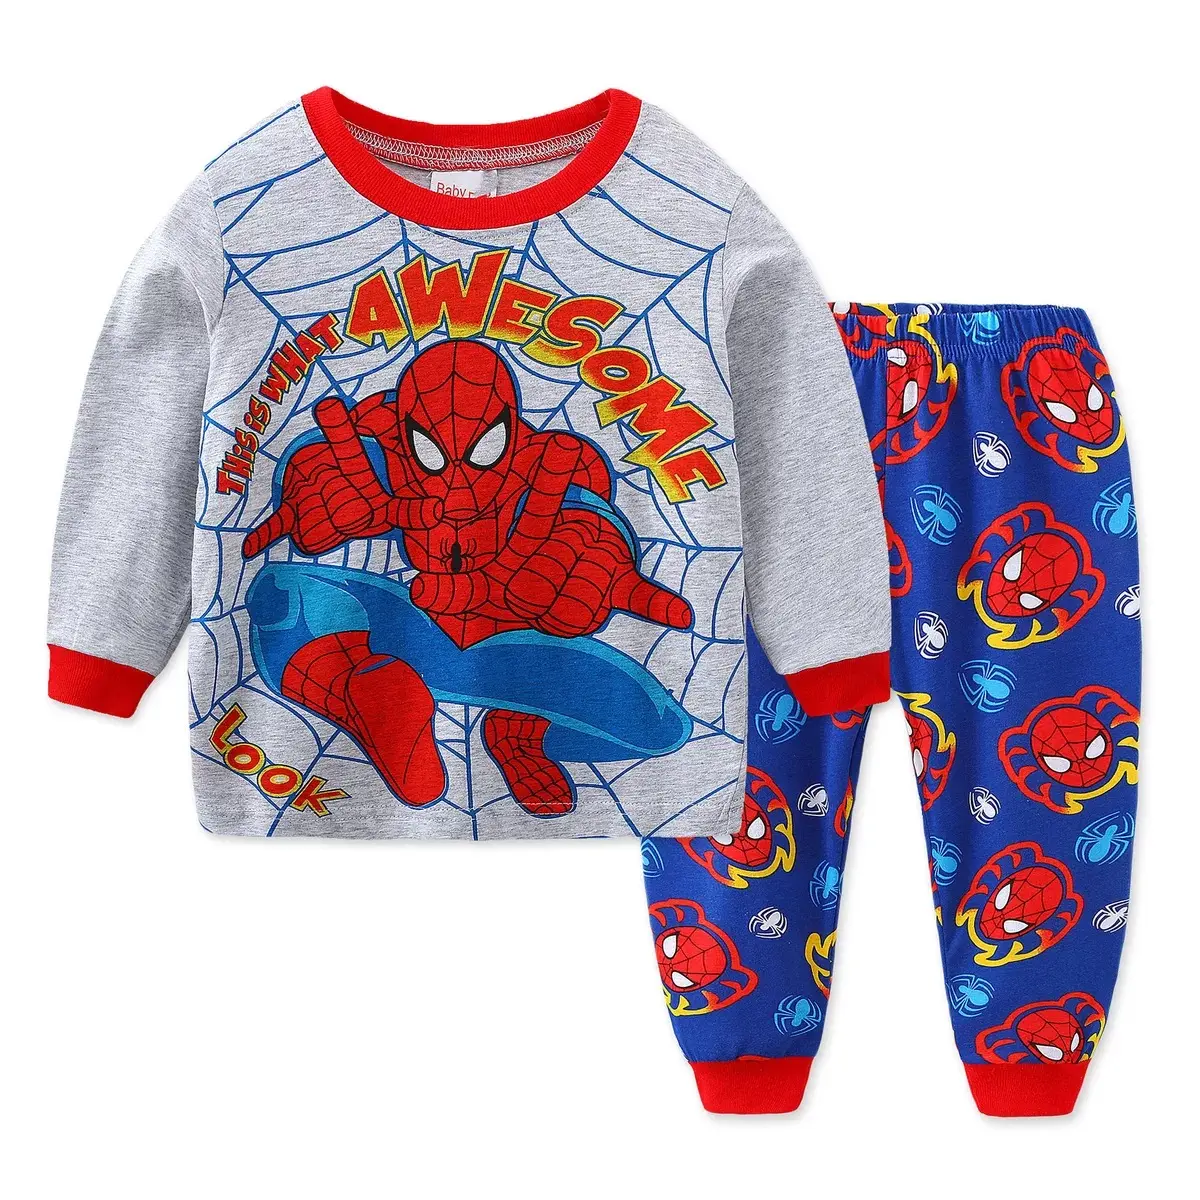 Children's home clothes suit bottom shirt pajamas children round collar home clothes two sets of a generation